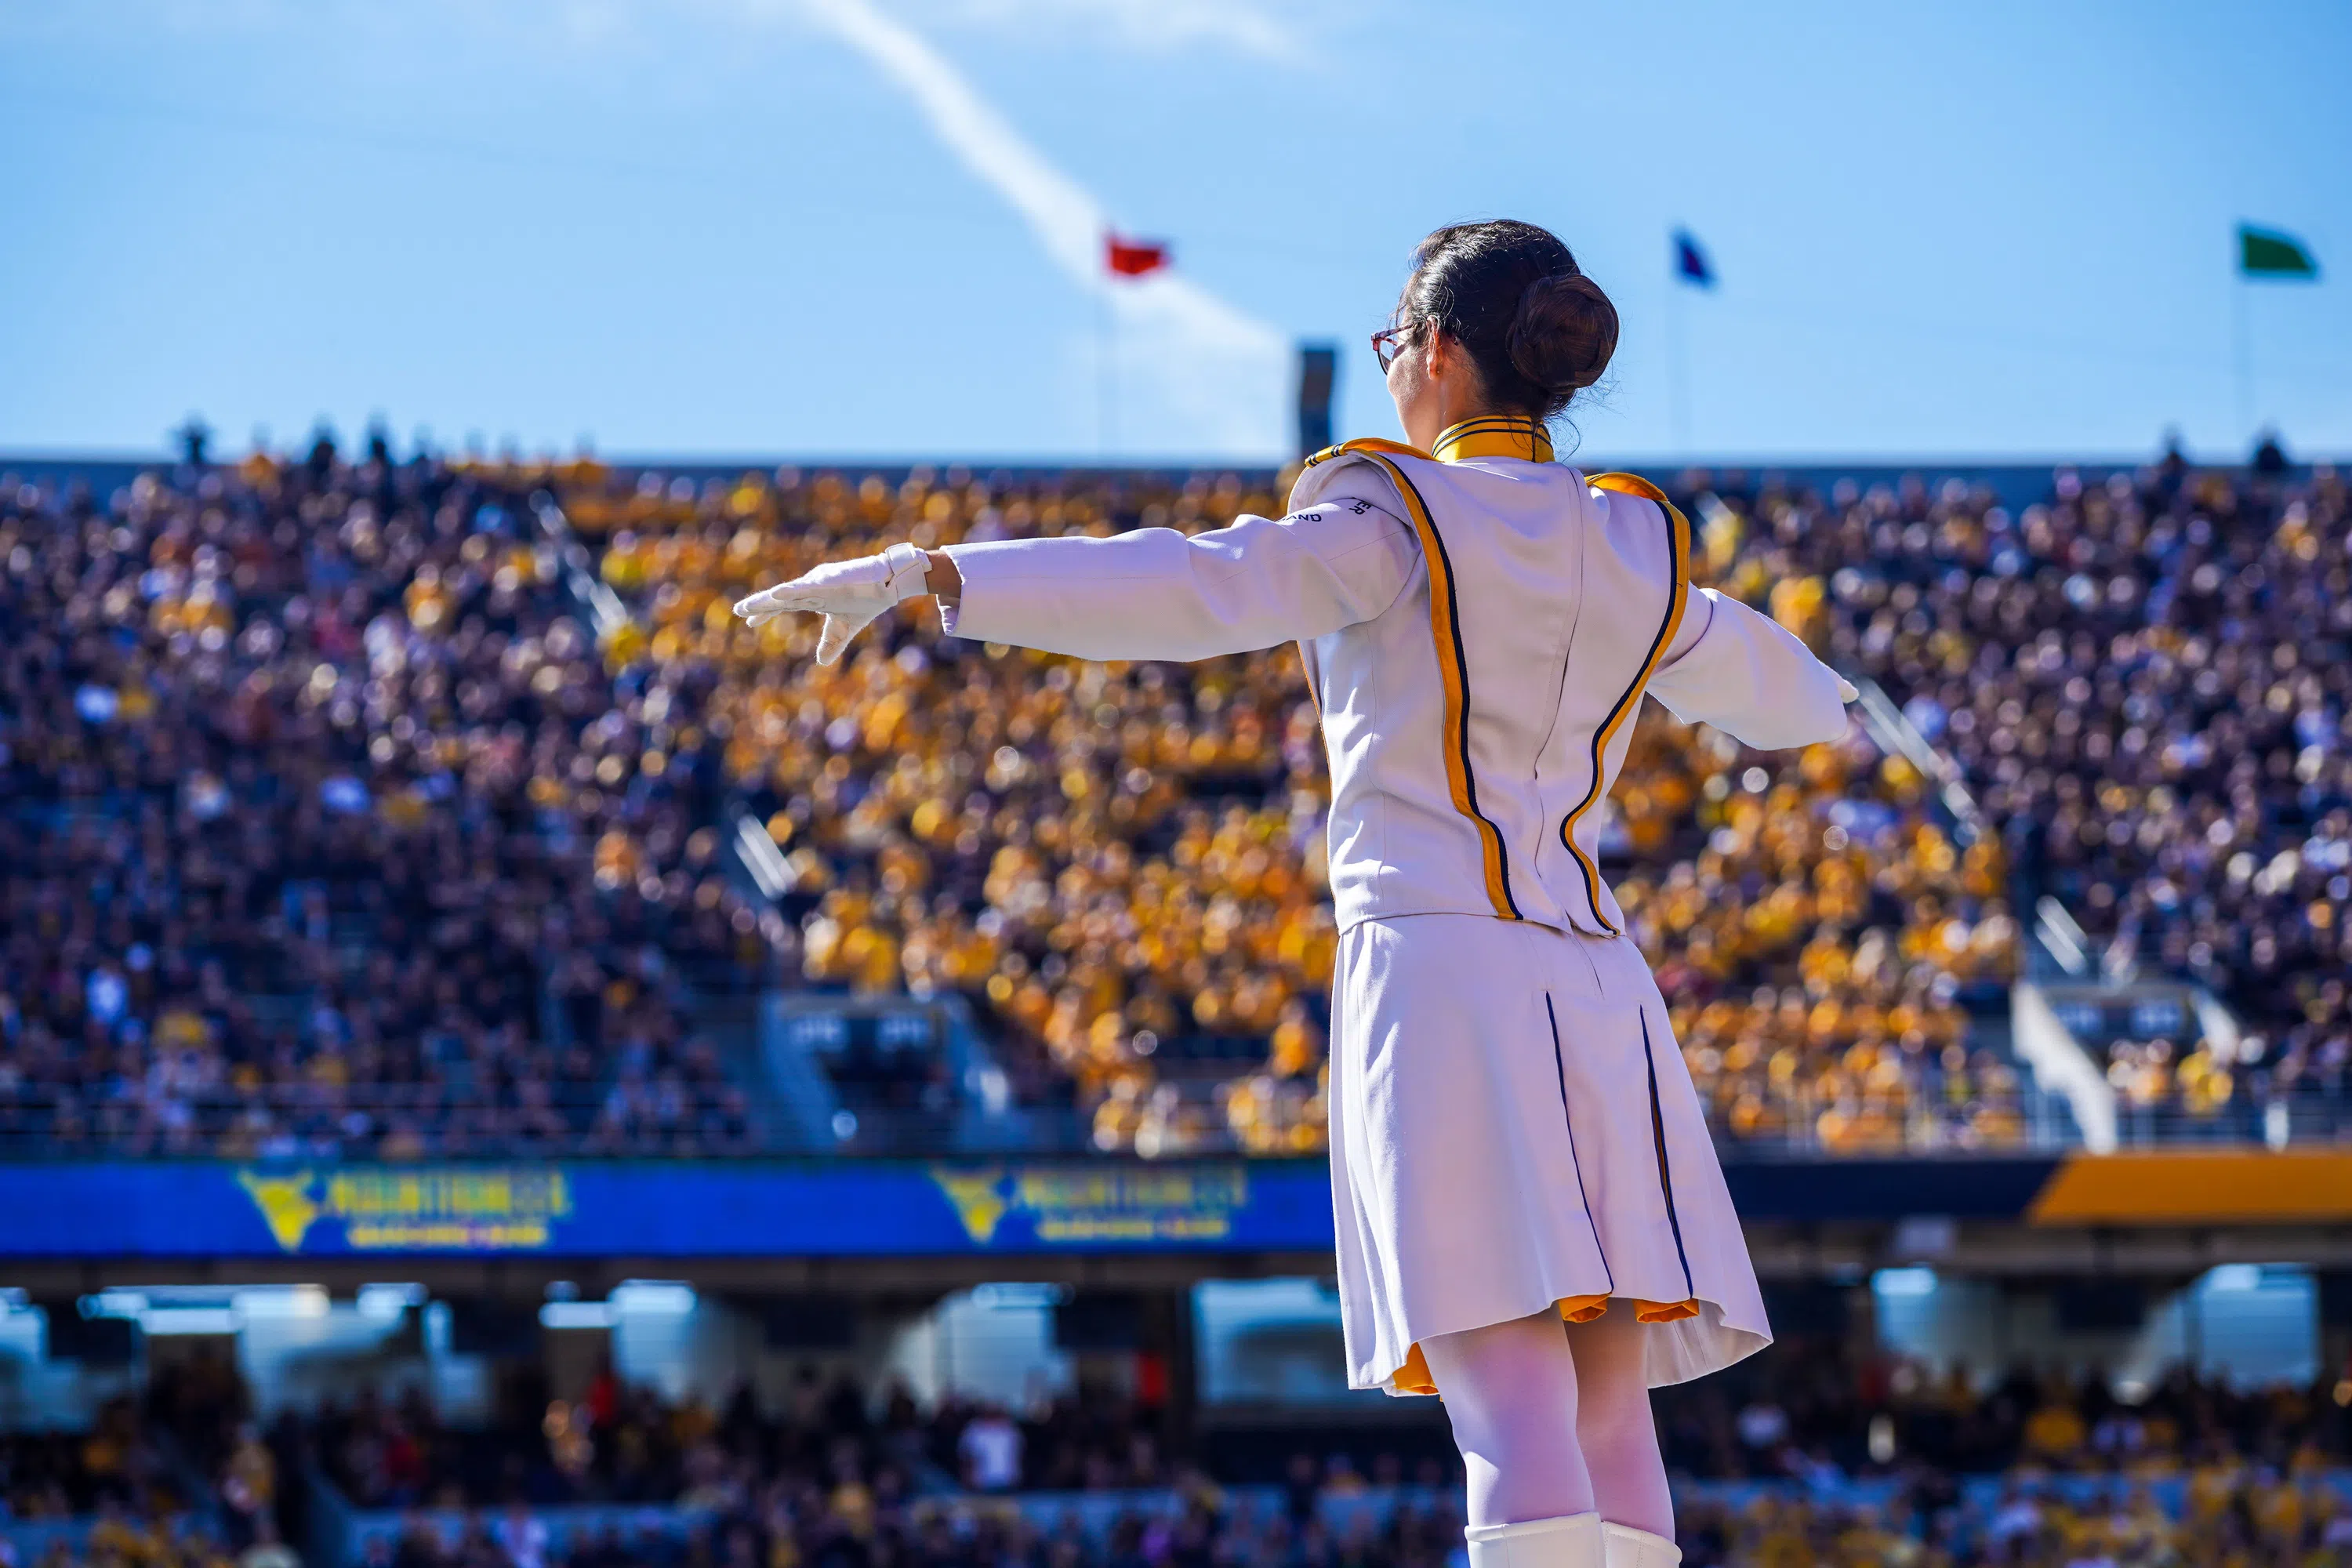 A WVU Drum Major conducts the band in the football stadium